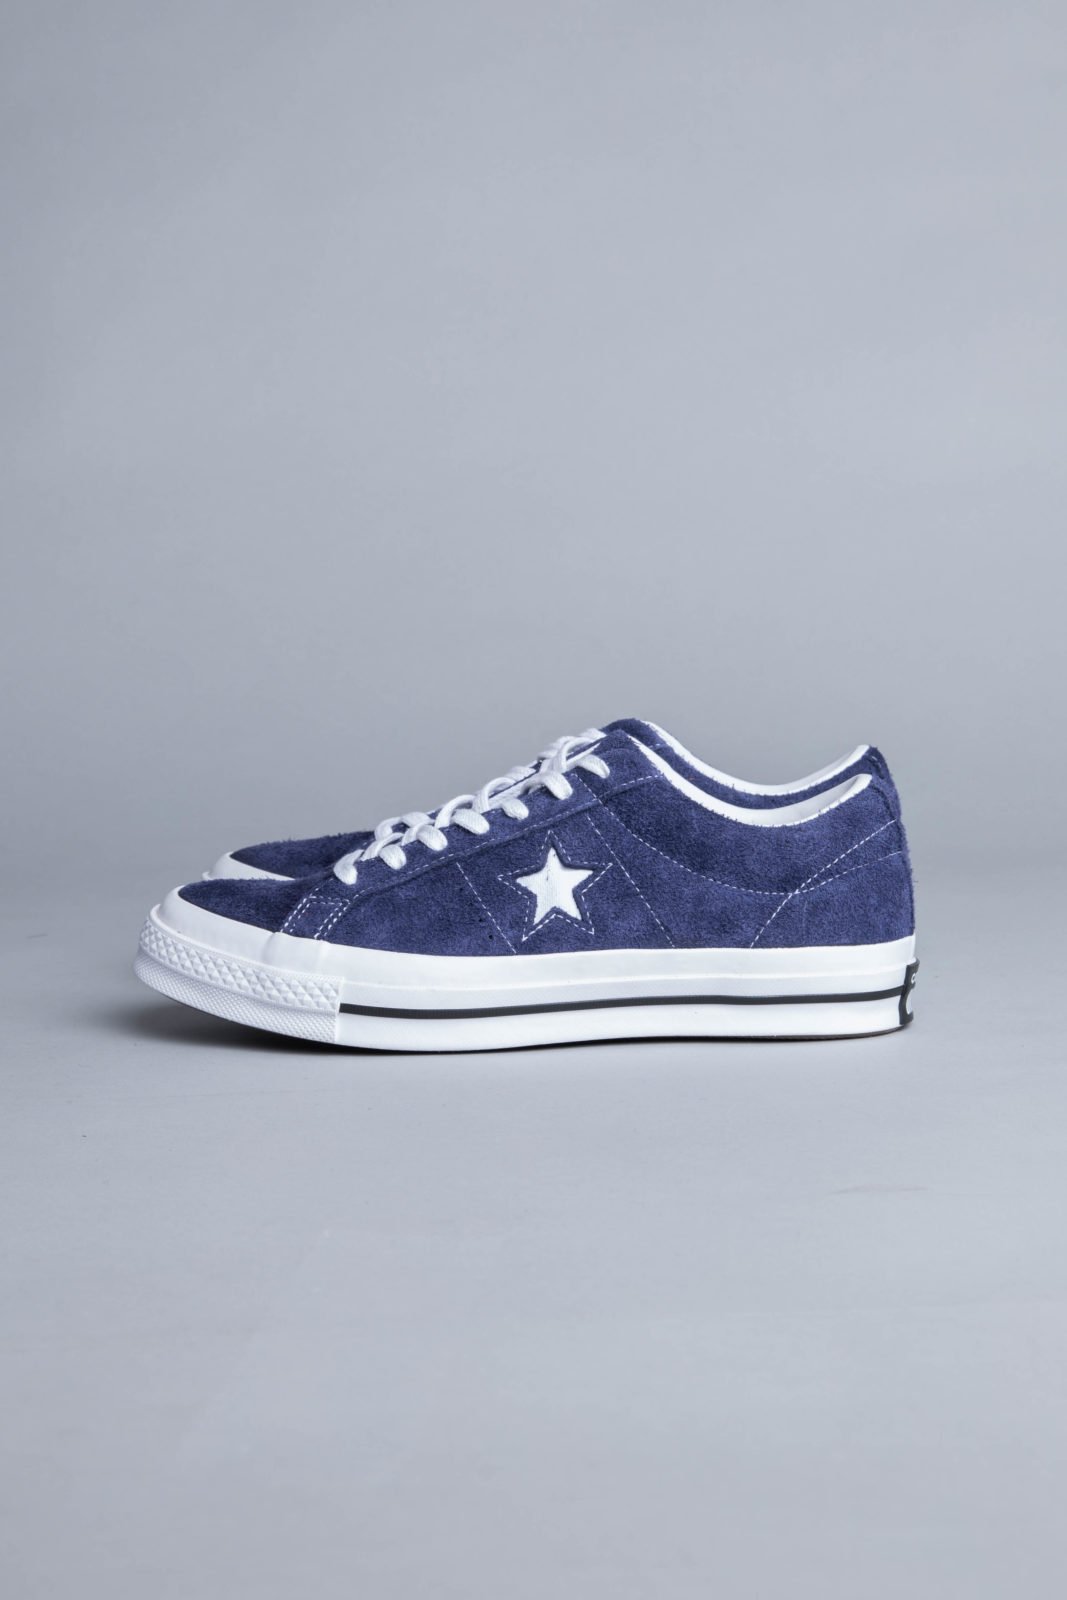 Converse One Star OX Eclipse 